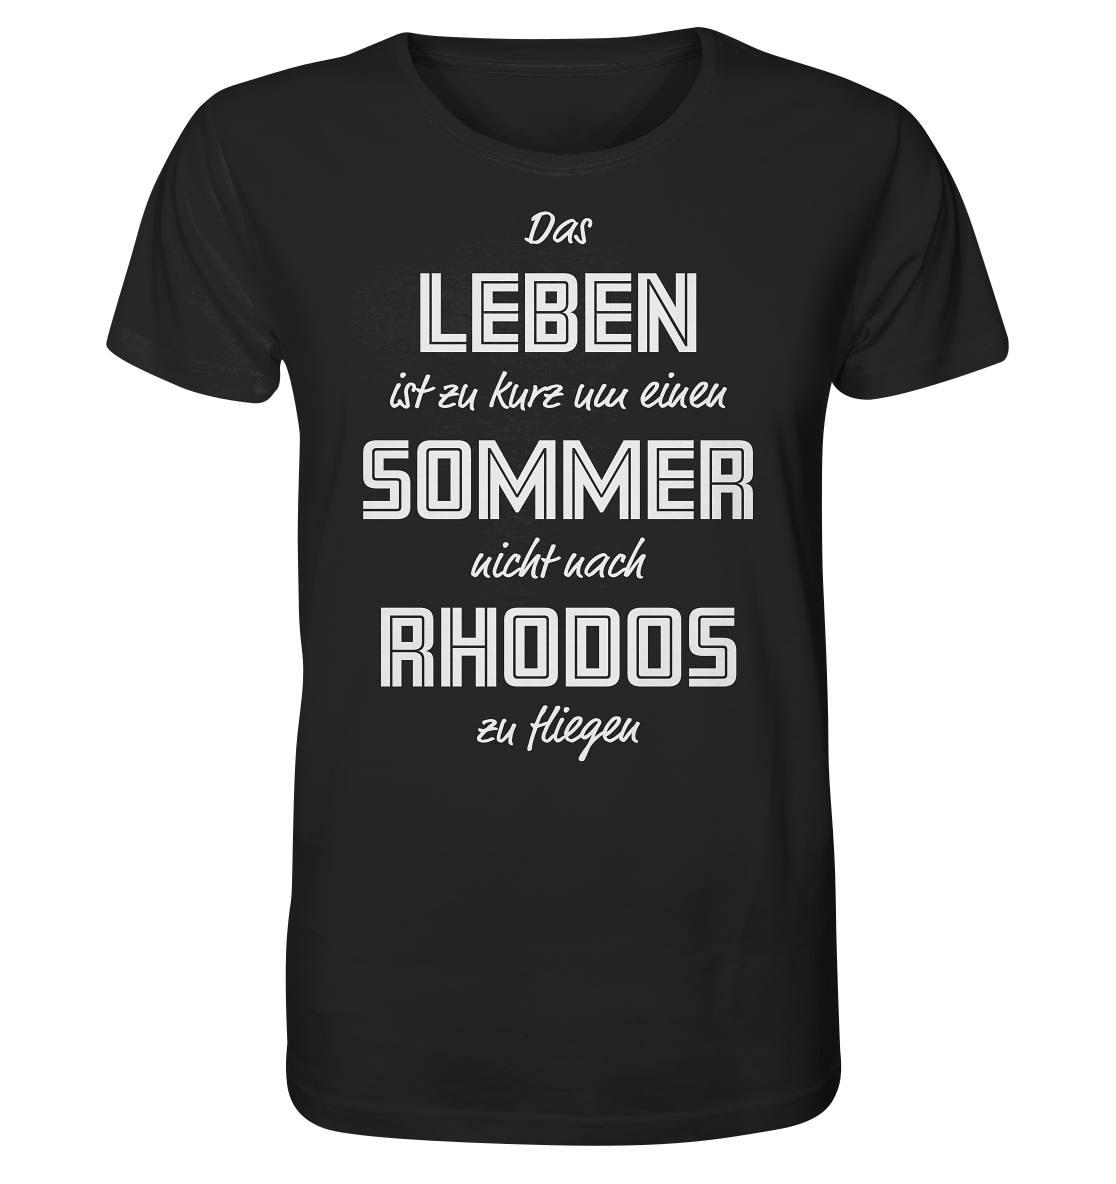 Life is too short not to fly to Rhodes for a summer - Organic Shirt